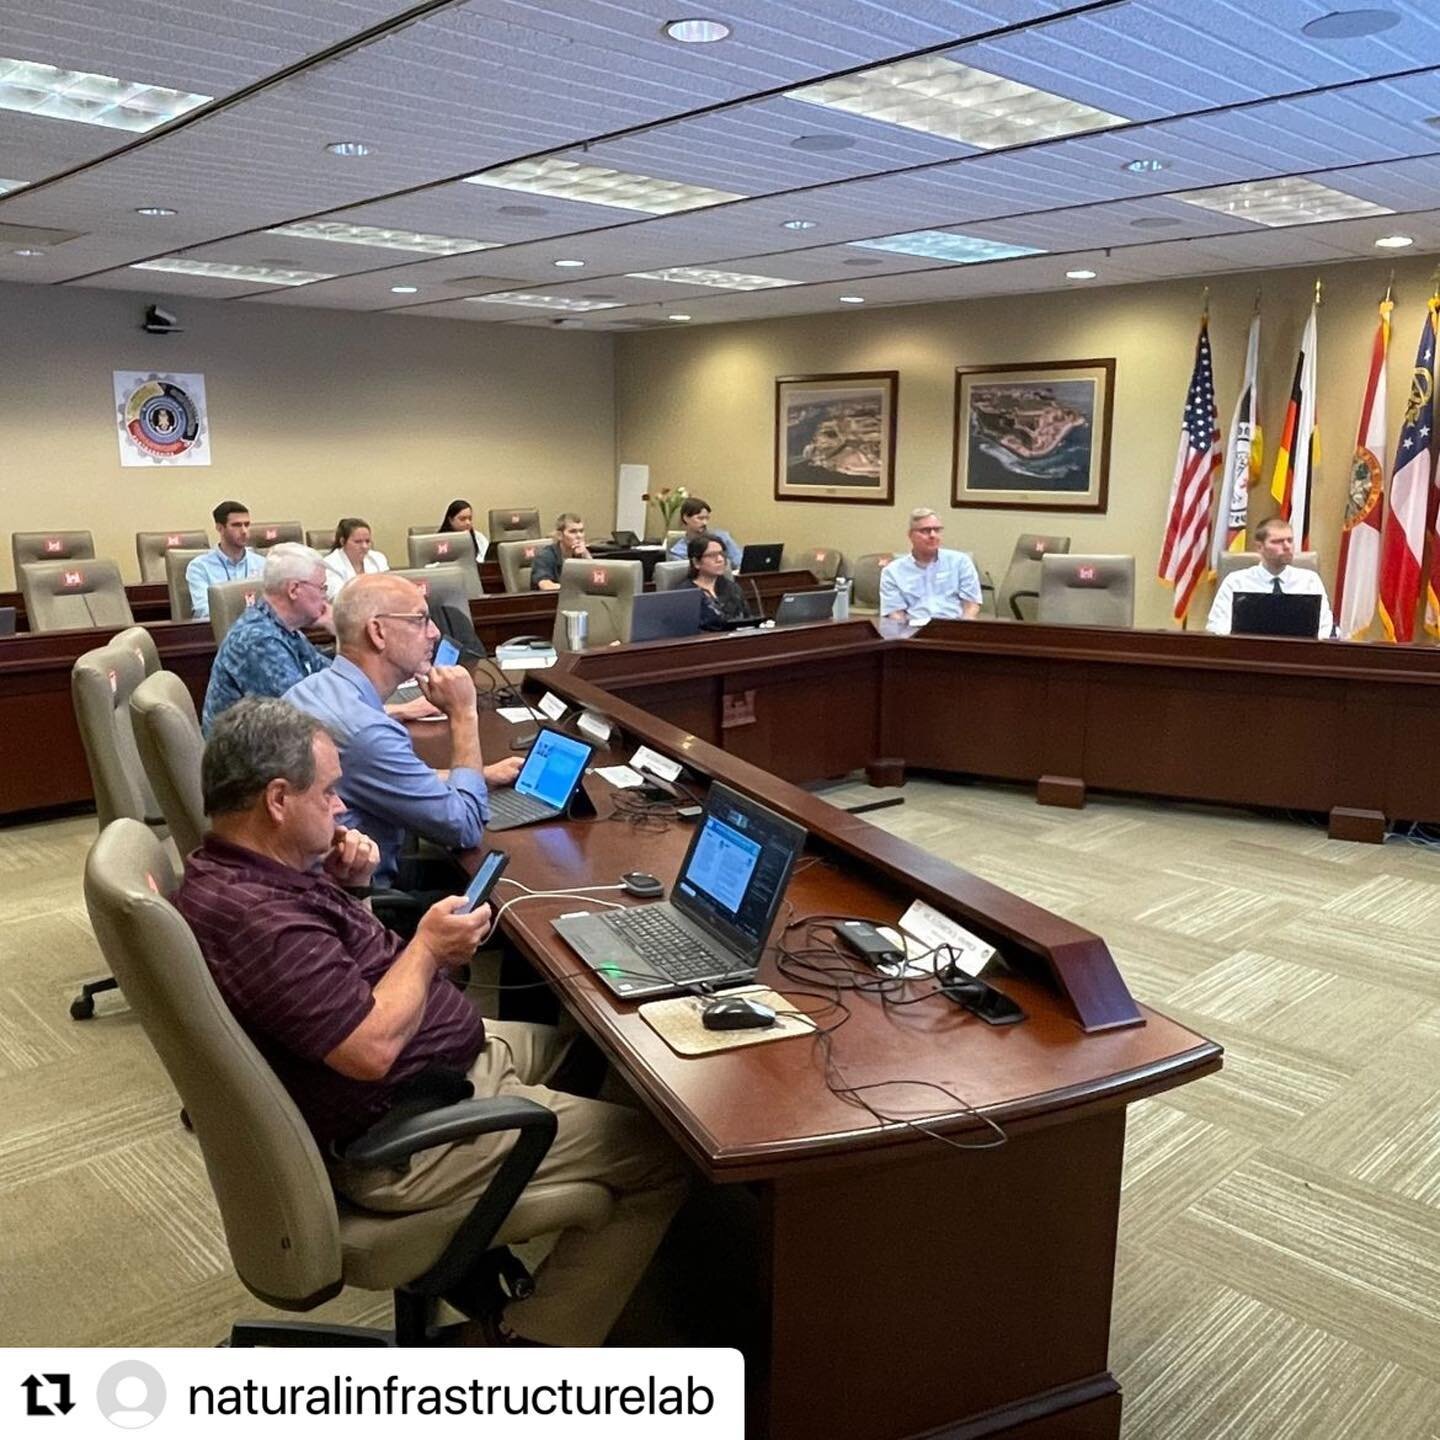 LVF Partner &amp; UVA Assistant Professor Michael Luegering is at the forefront of Natural &amp; Nature Based Feature research and design. This past week he met with the US Army Corps of Engineers to discuss Coastal &amp; Upland design opportunities.